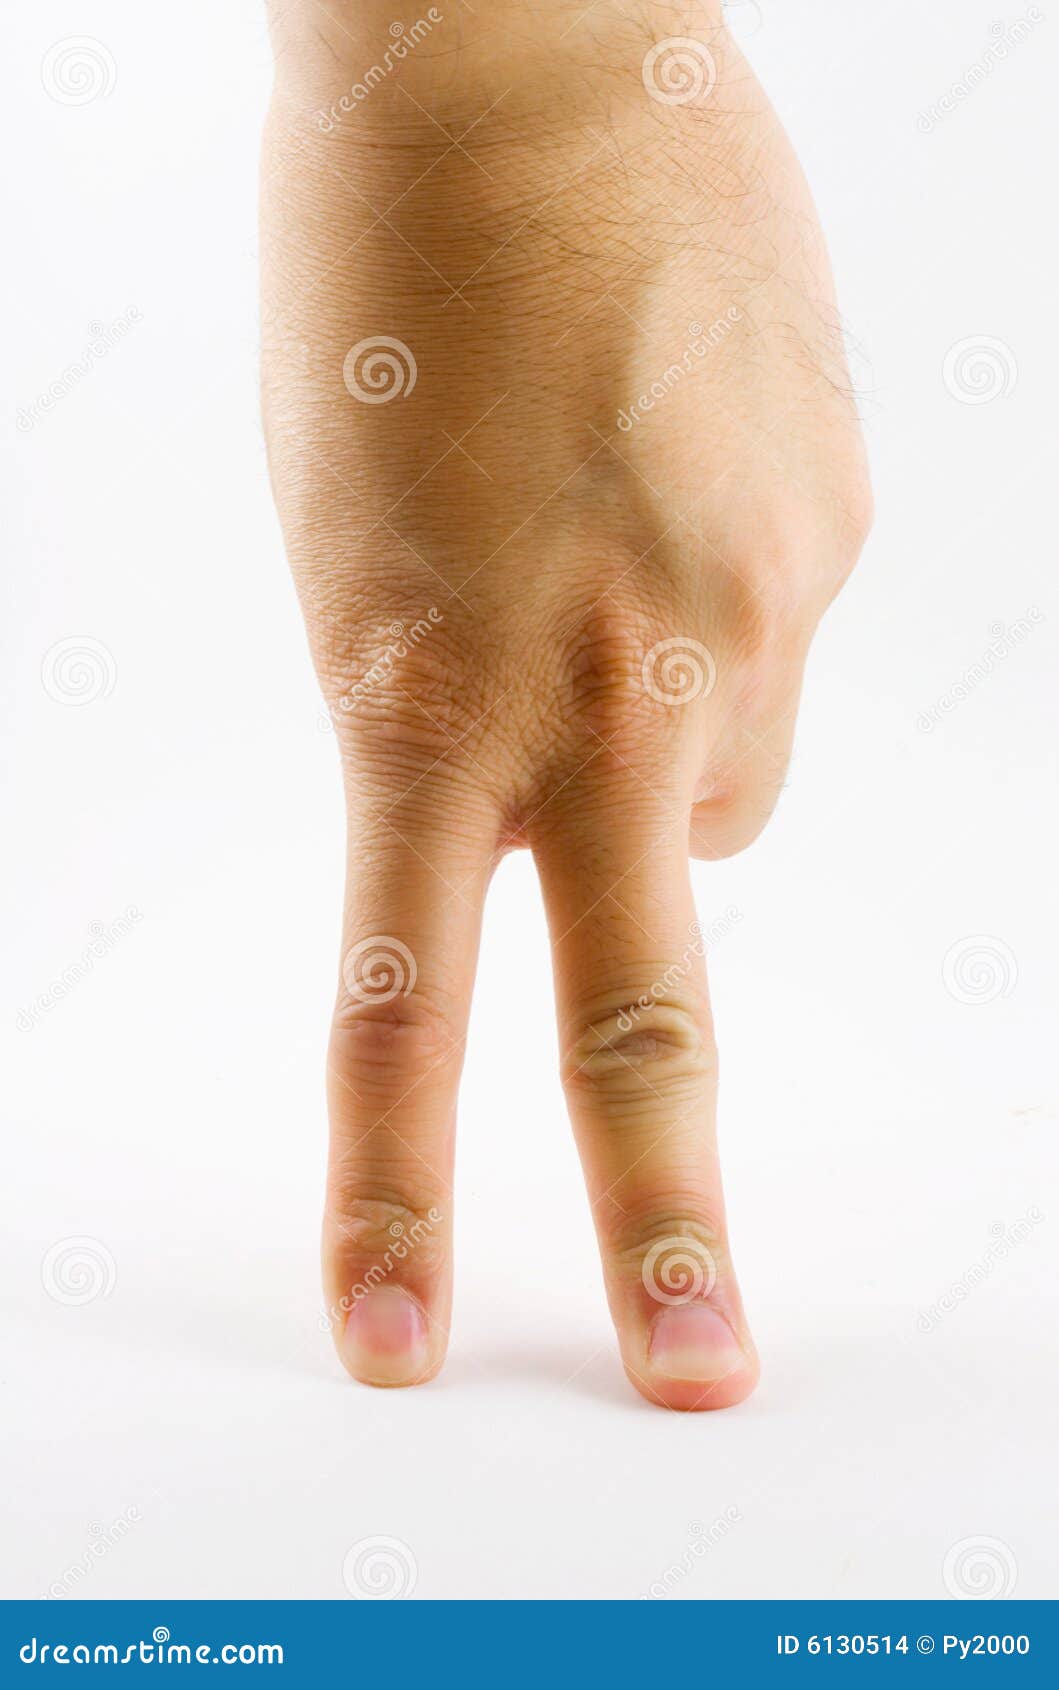 Hand And Two Fingers Stock Images - Image: 6130514